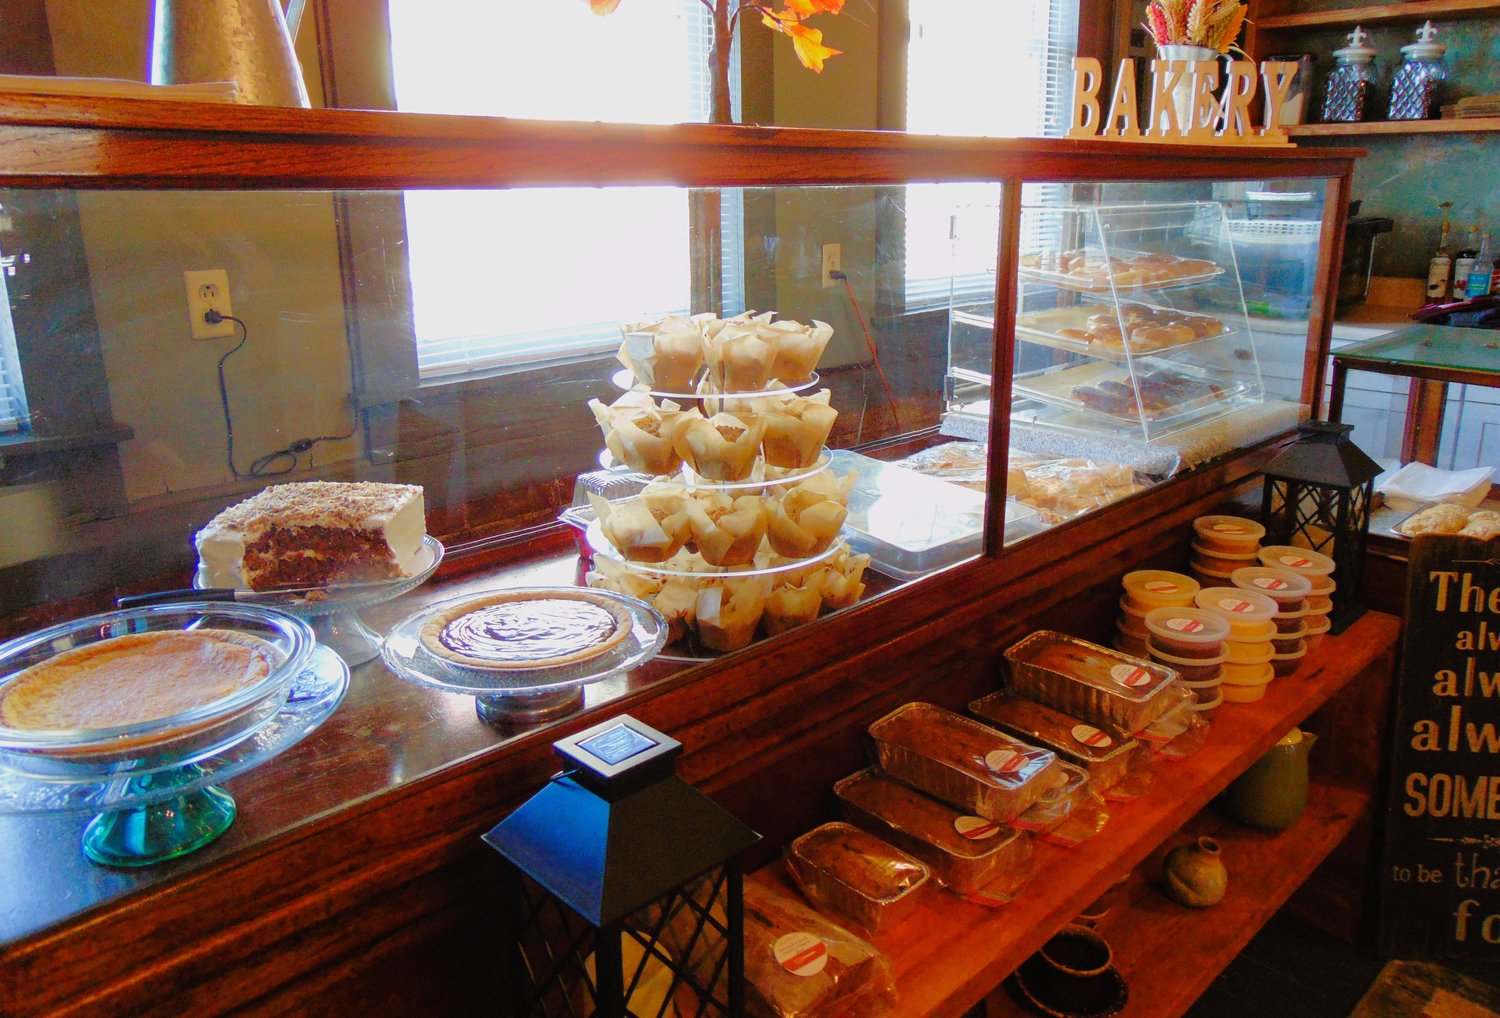 Becky has ready on hand a variety of cakes, pies,
donuts, muffins, and more.